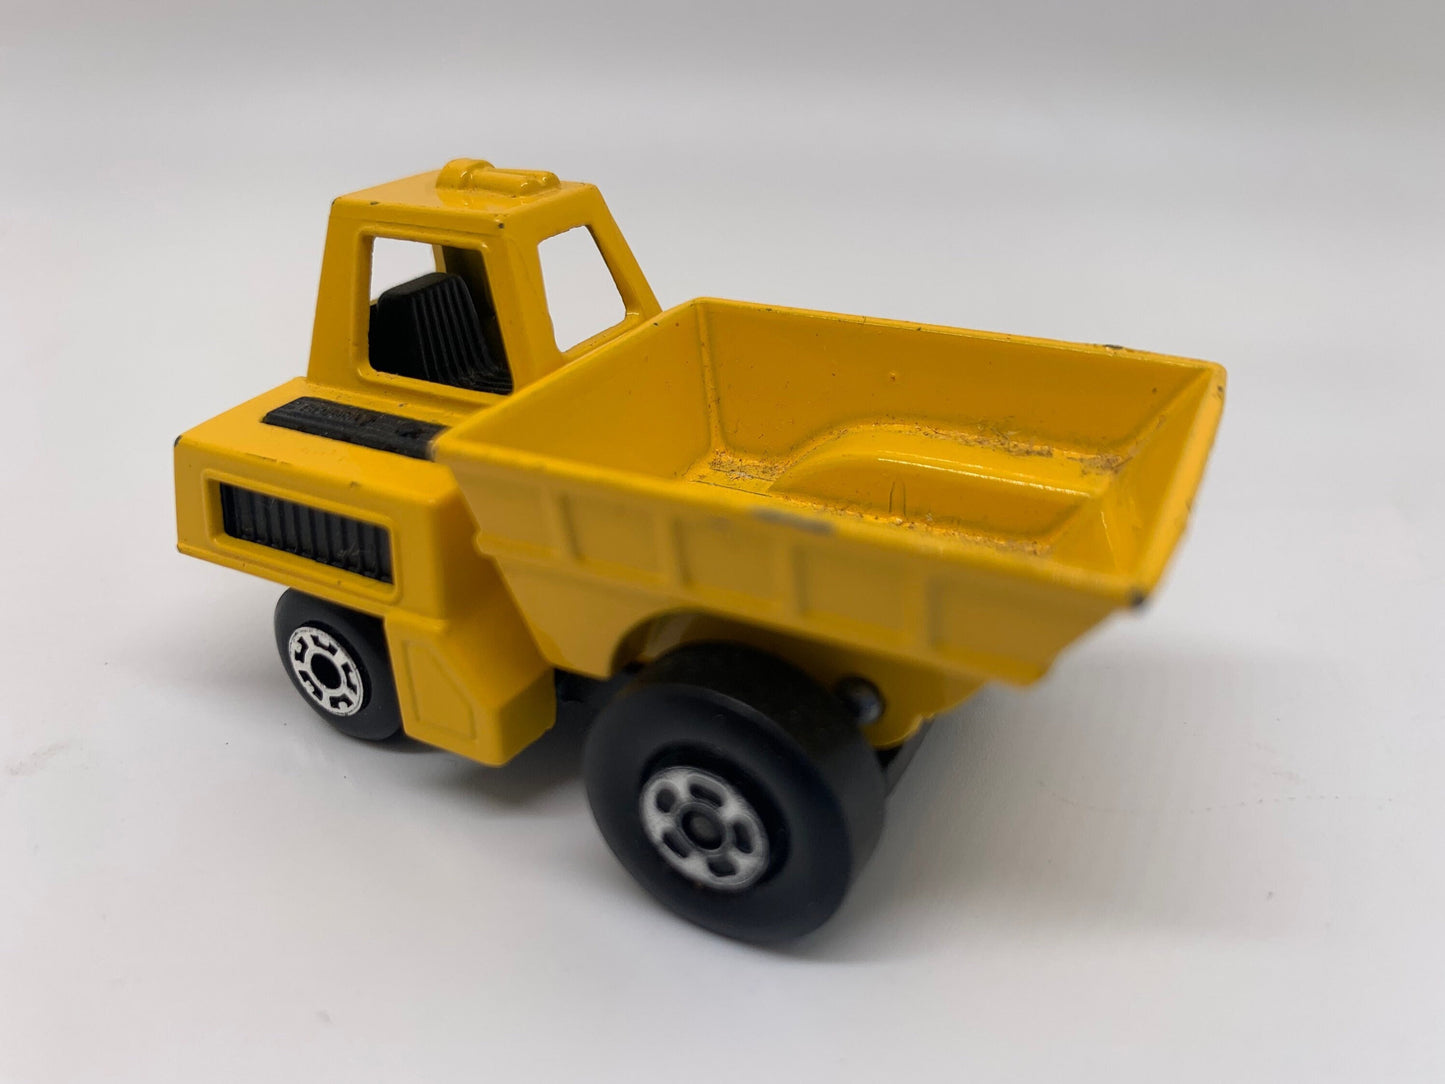 Matchbox Site Dumper Yellow MB26 Matchbox 75 Perfect Birthday Gift Rare Miniature Collectable Model Toy Car